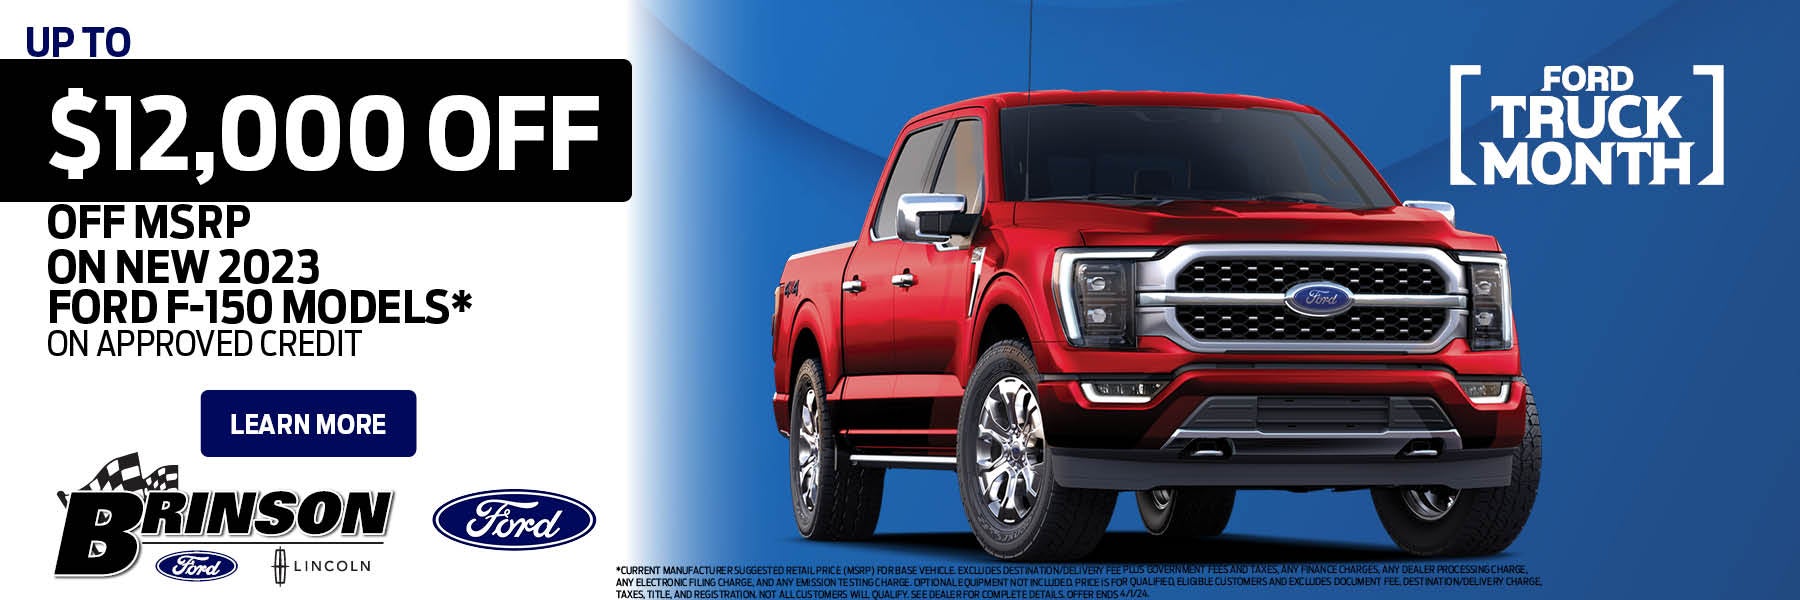 New 2023 Ford F-150 Models in Cirsicana, TX